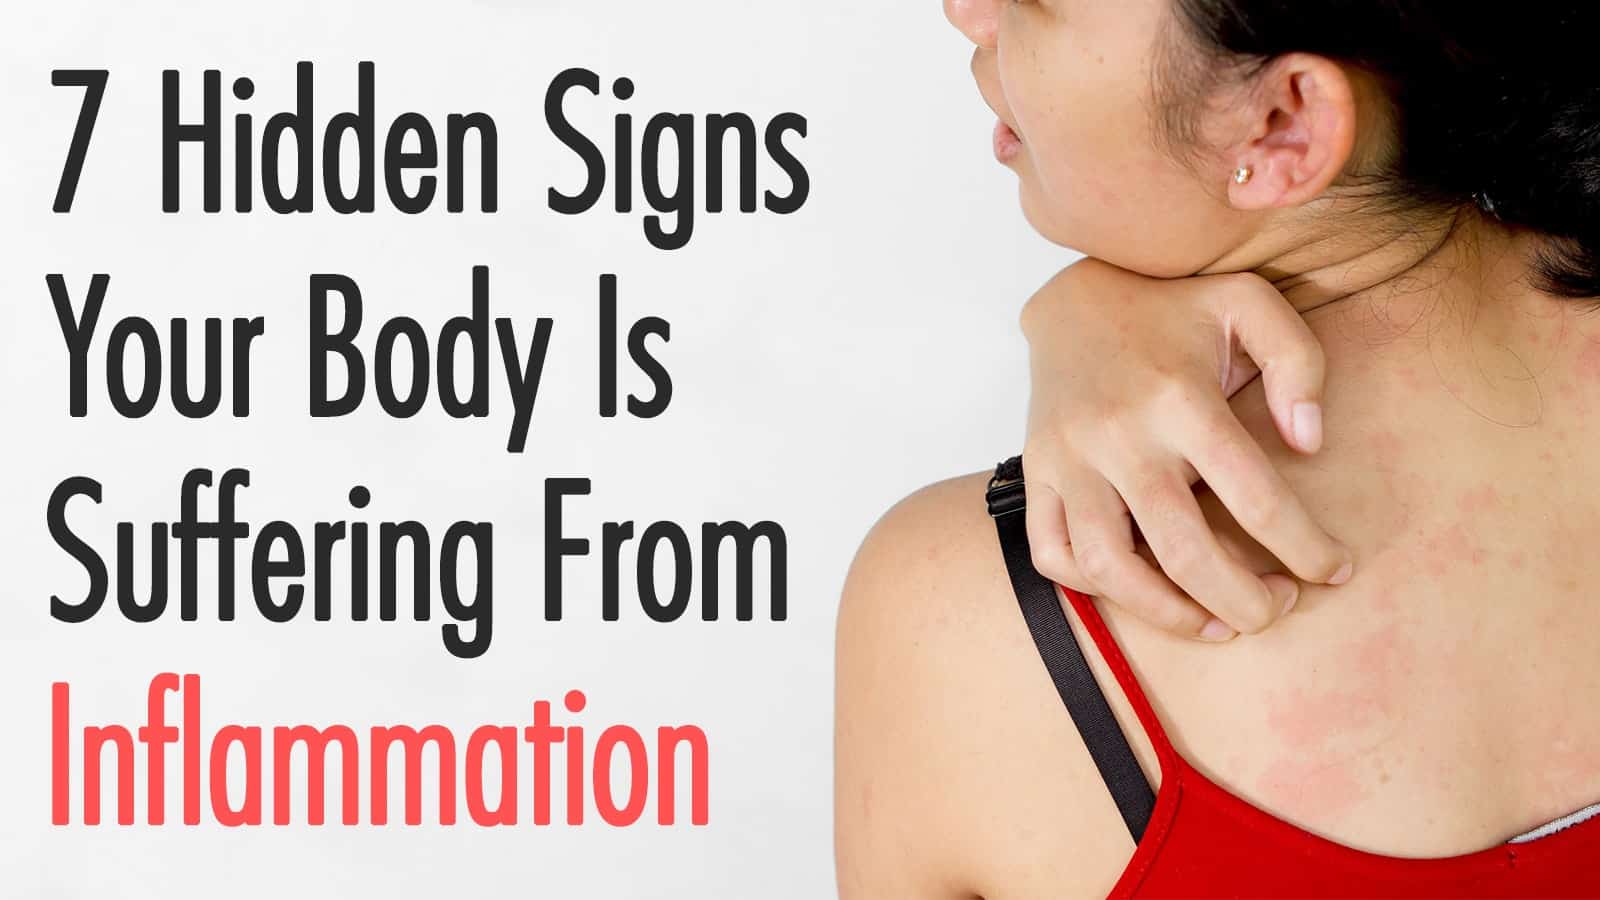 7 Hidden Signs Your Body Is Suffering From Inflammation